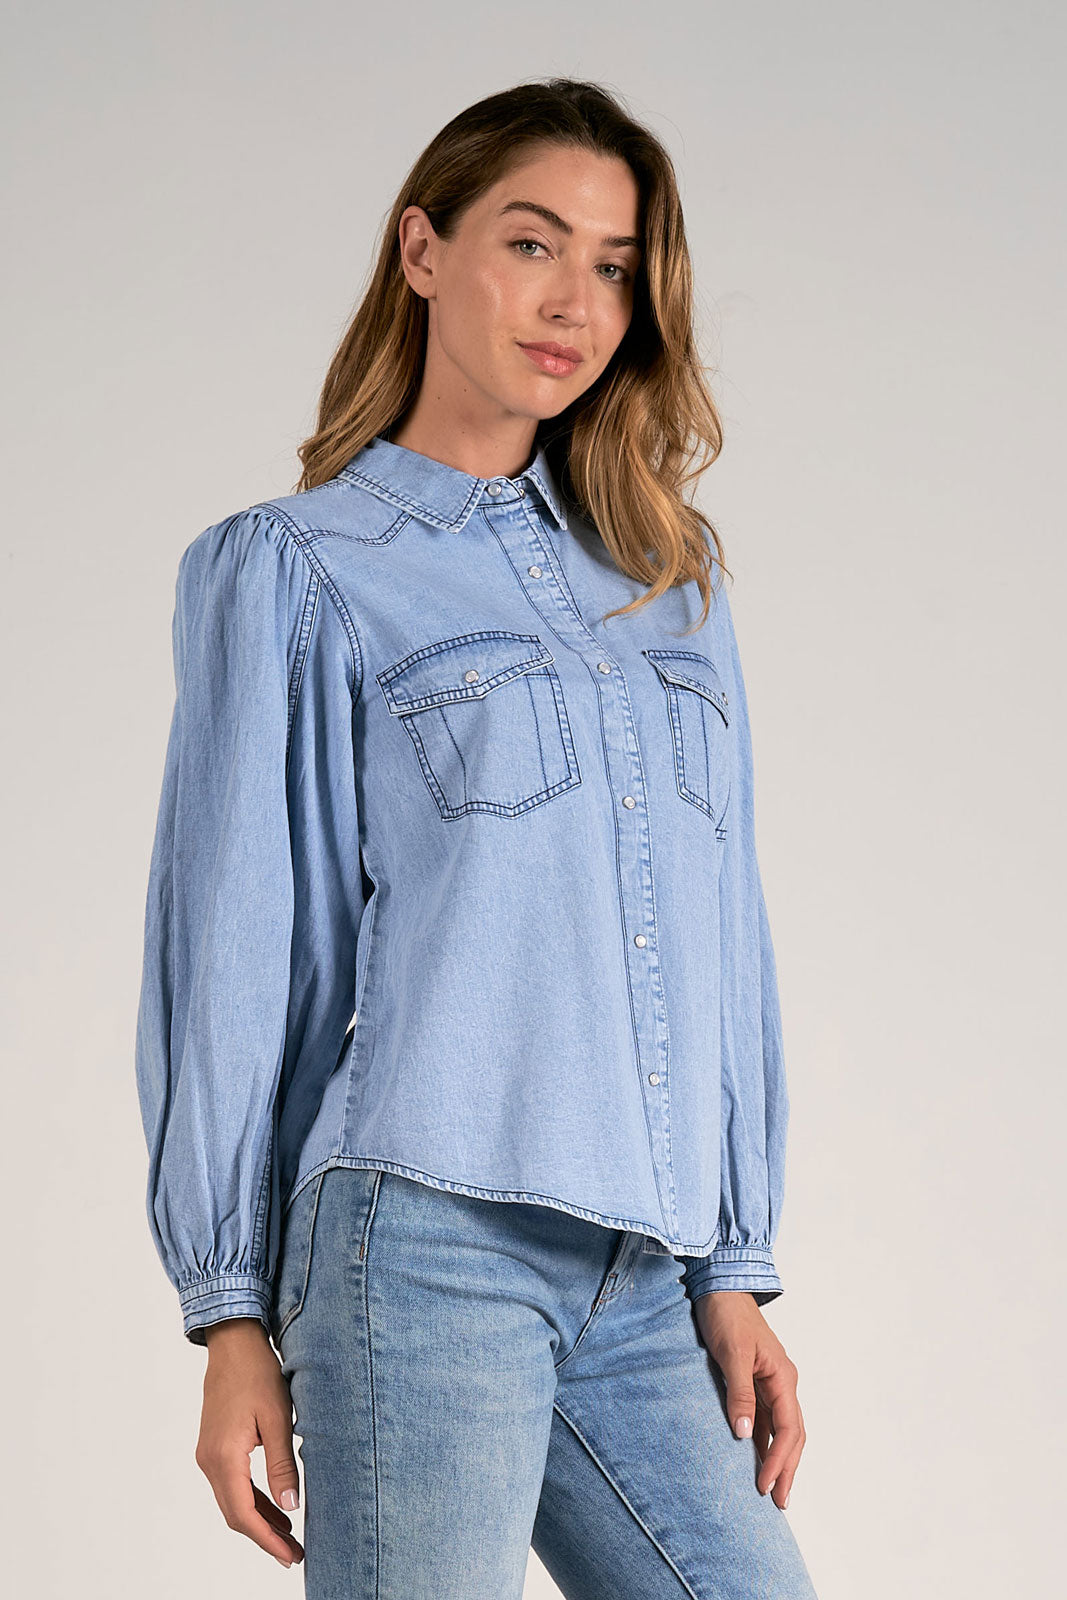 Wide Sleeve Button Down